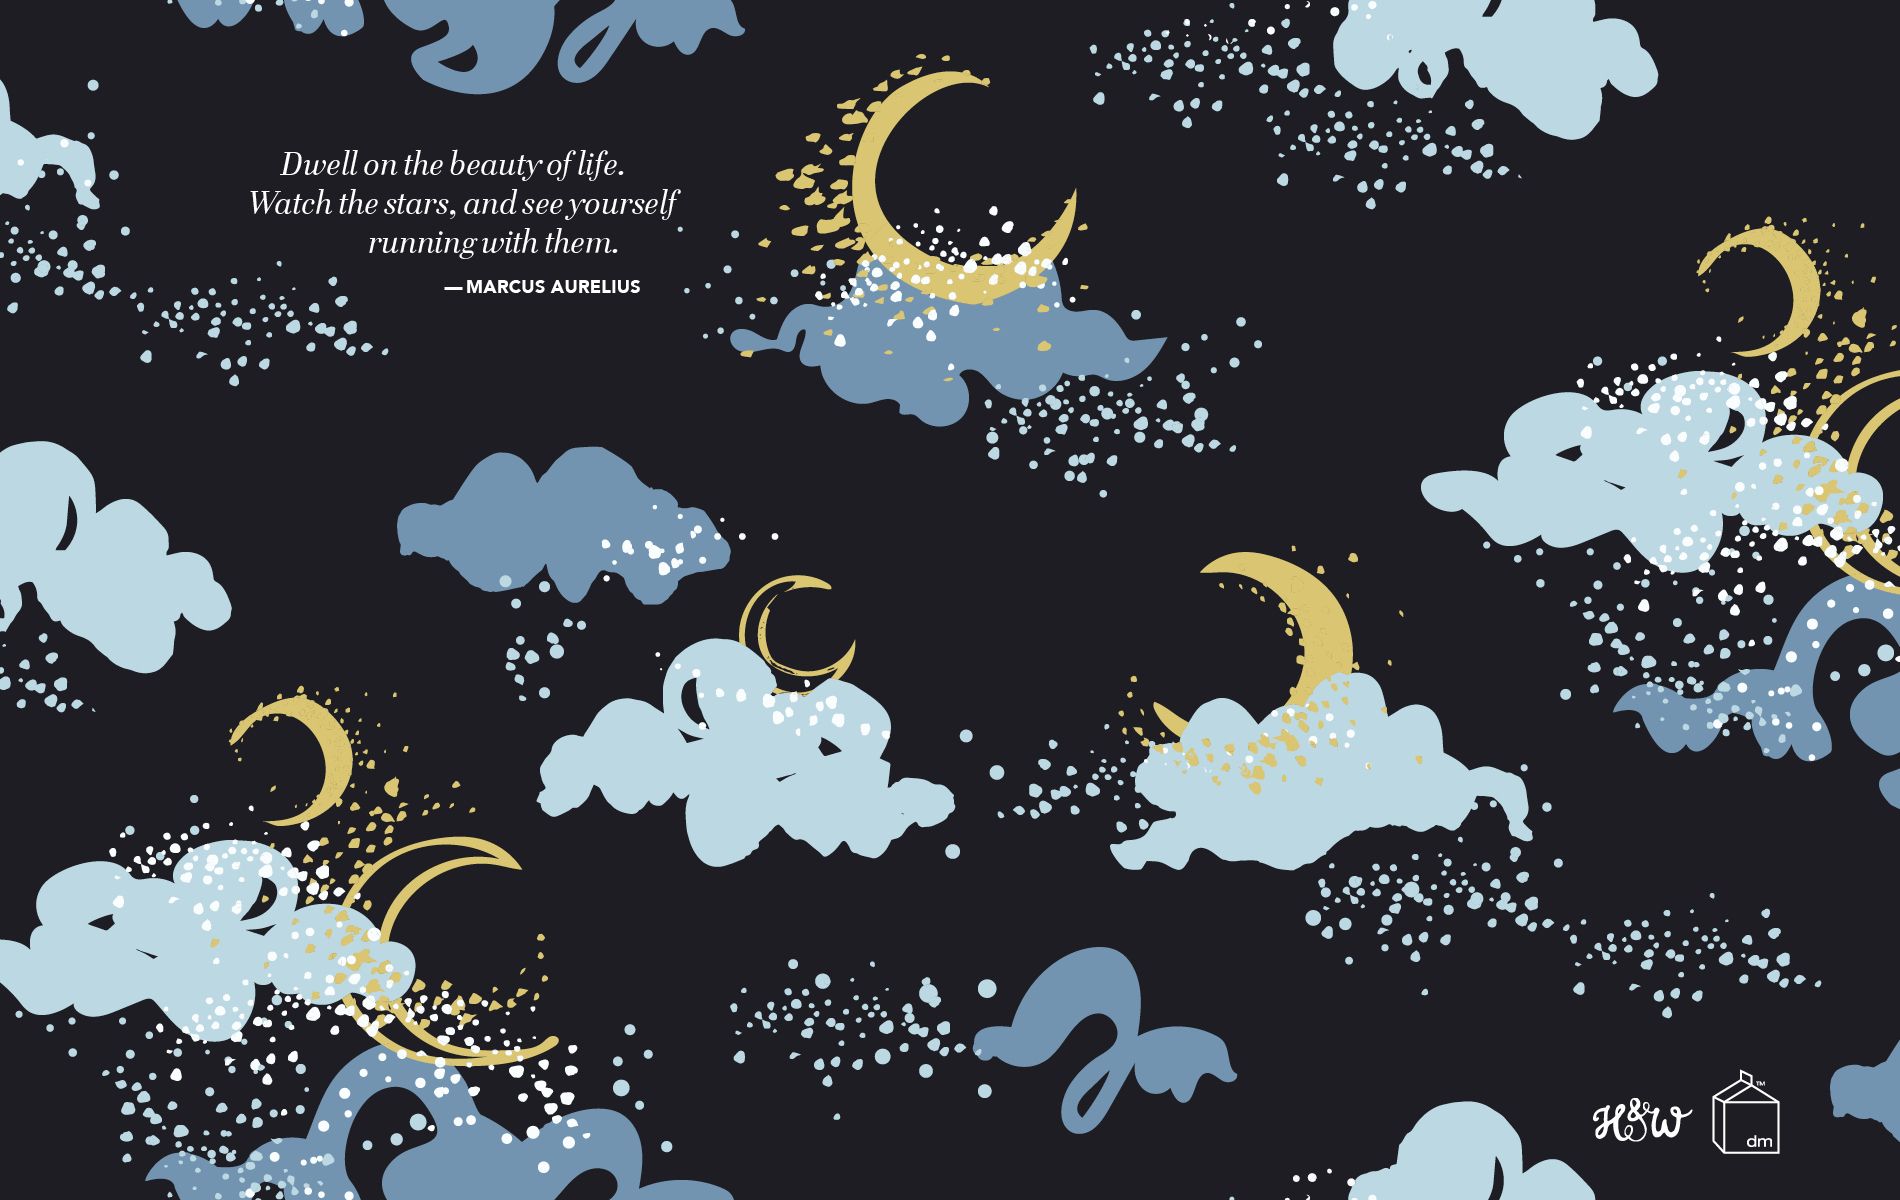 A blue and white pattern with clouds, stars - August